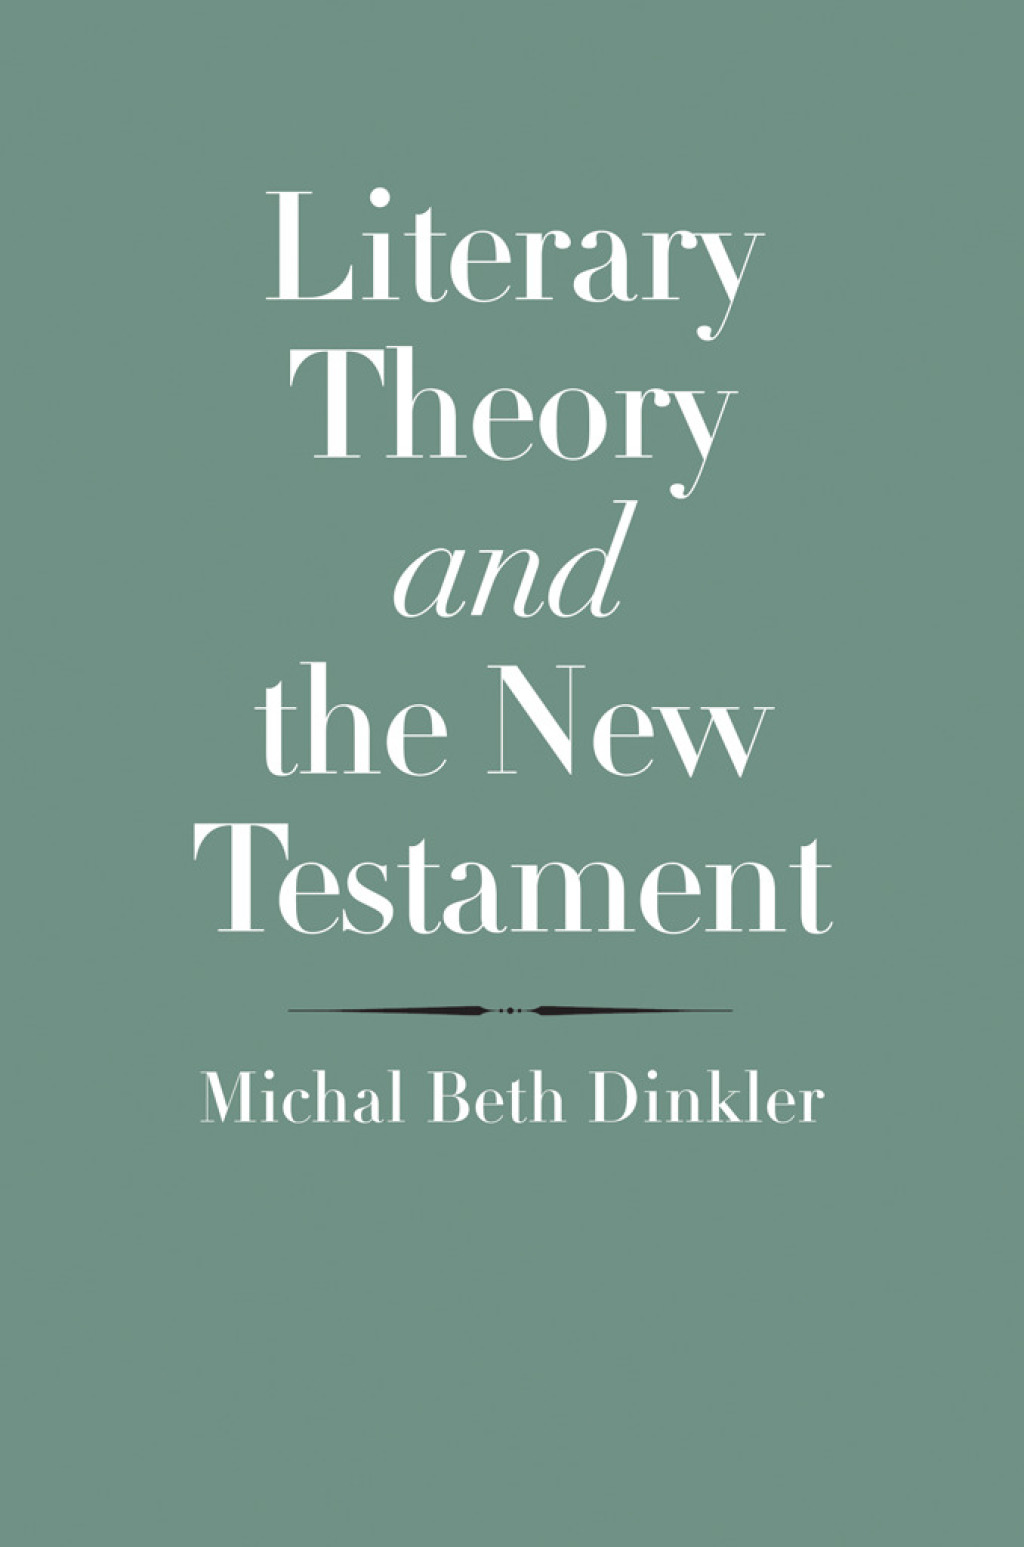 Literary Theory and the New Testament (eBook) - Michal Beth Dinkler,